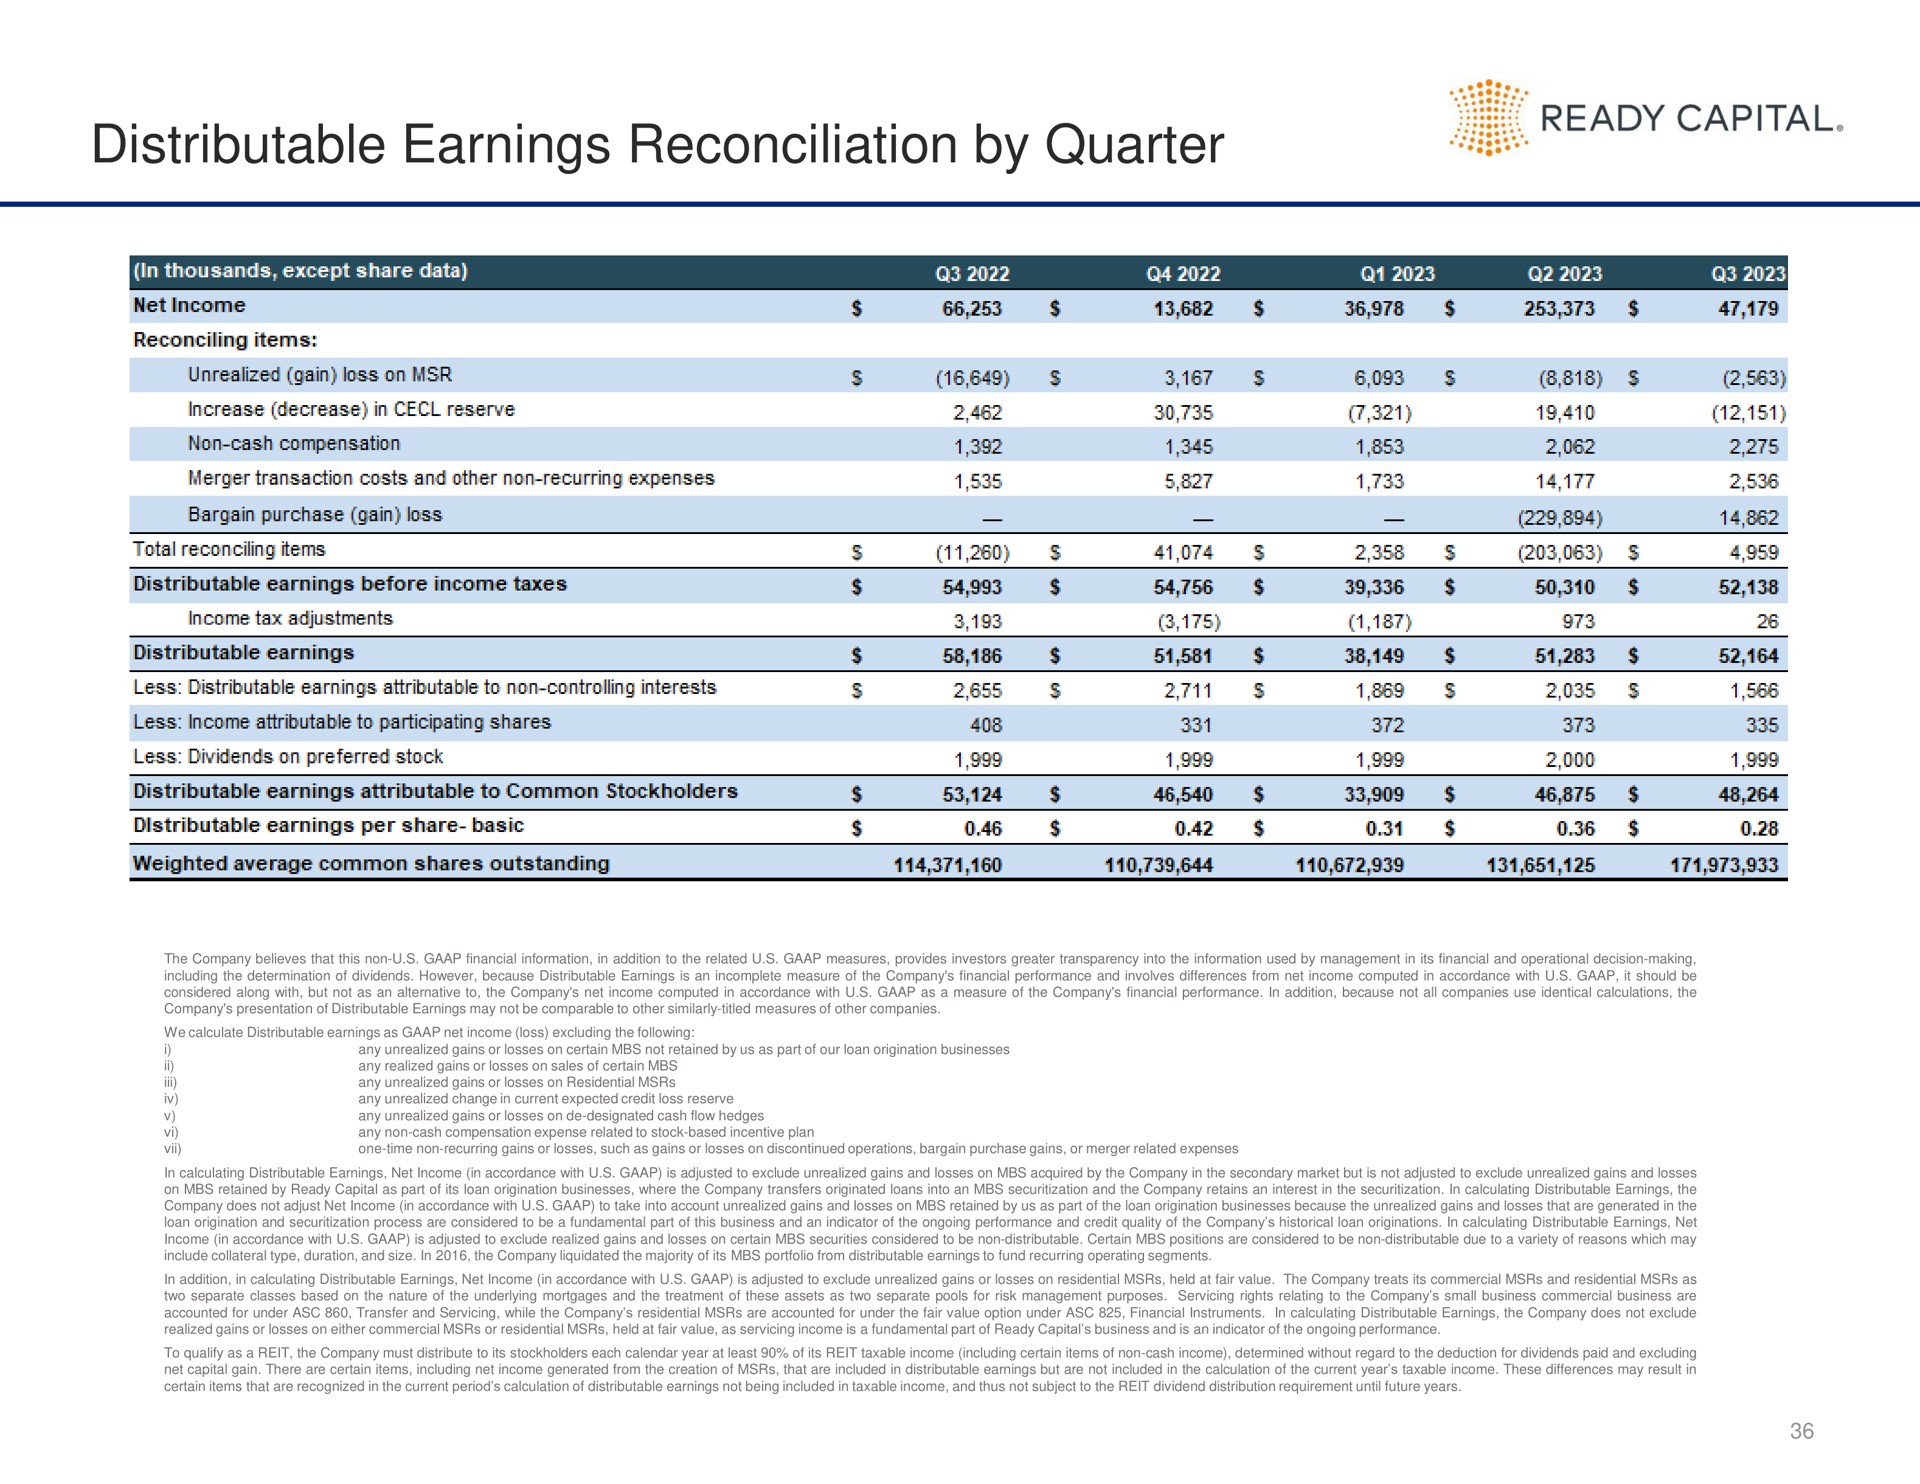 distributable earnings reconciliation by quarter | Ready Capital